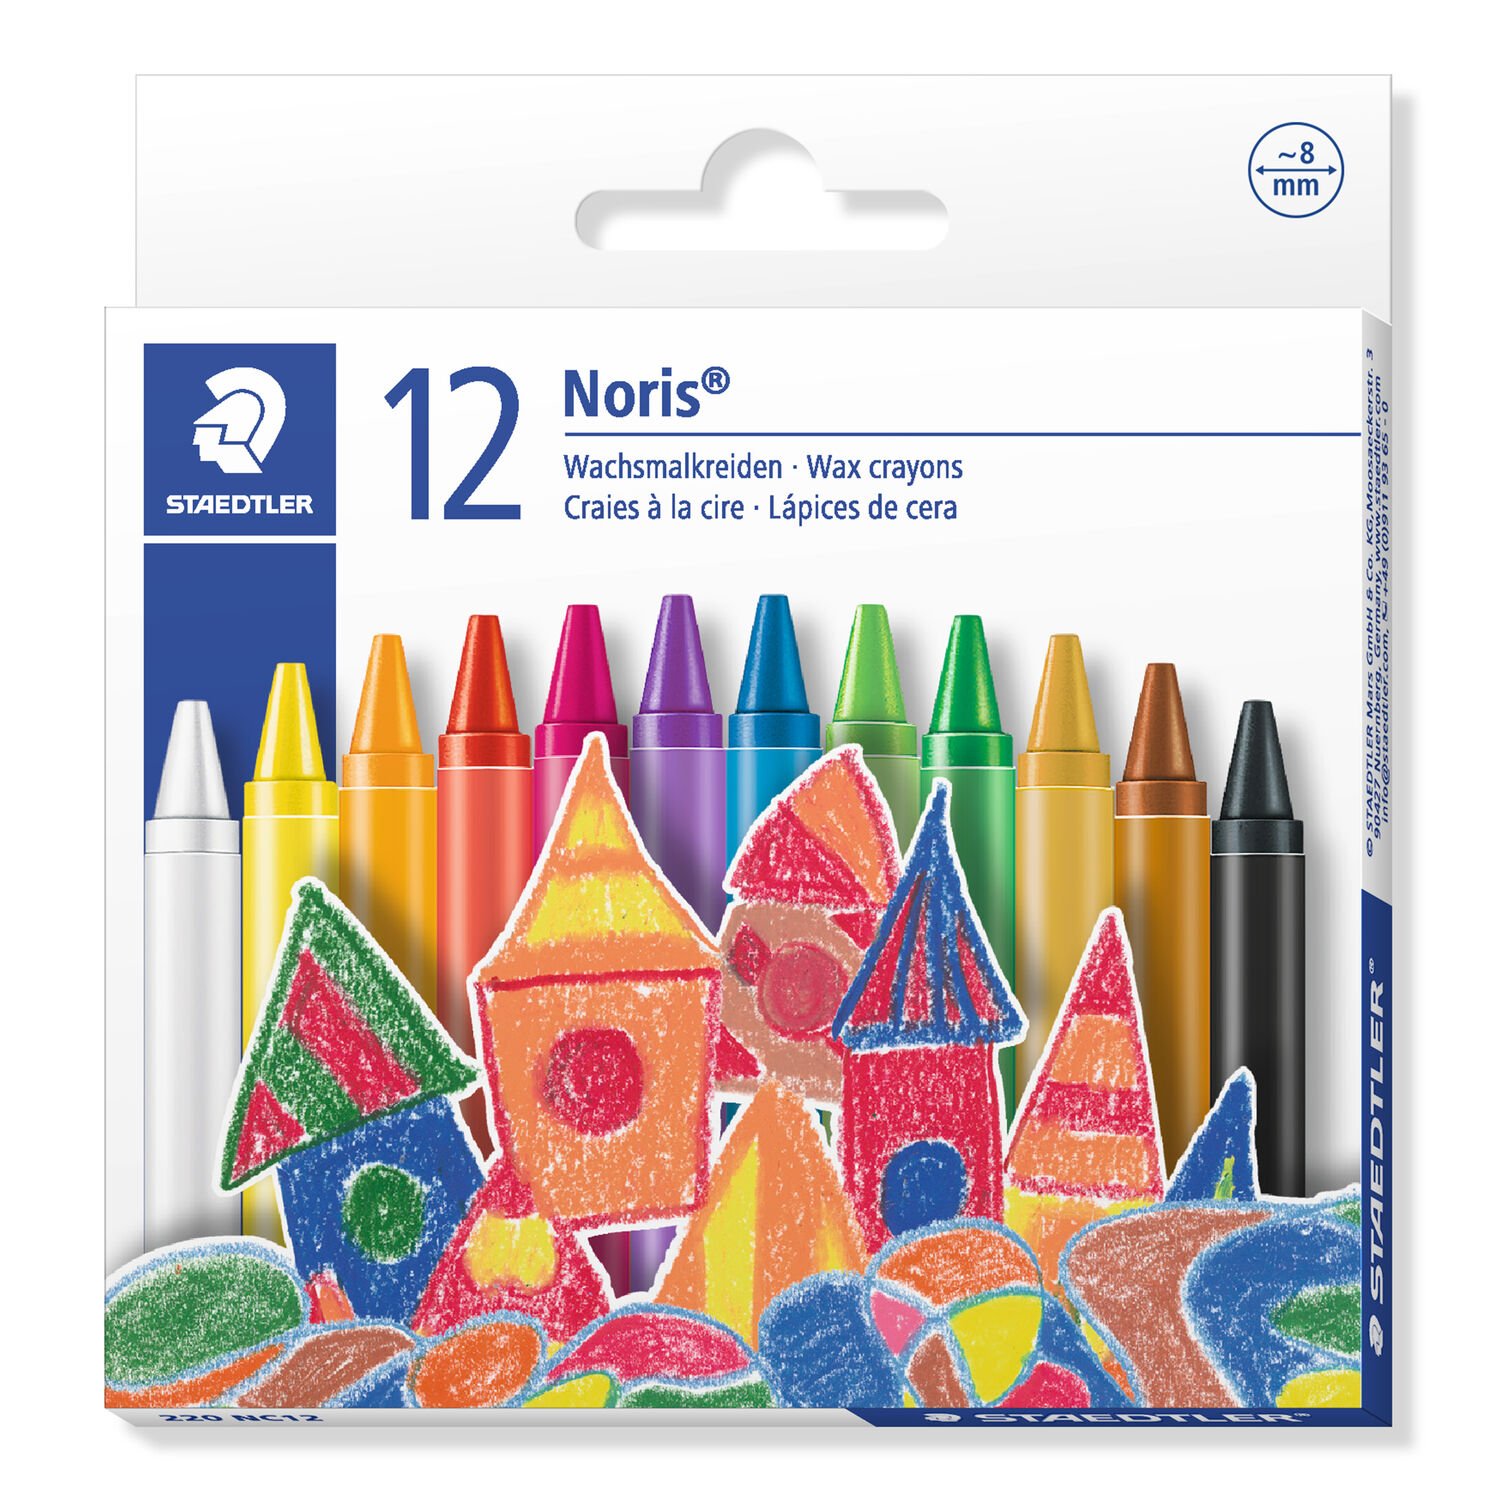 Staedtler Products-4